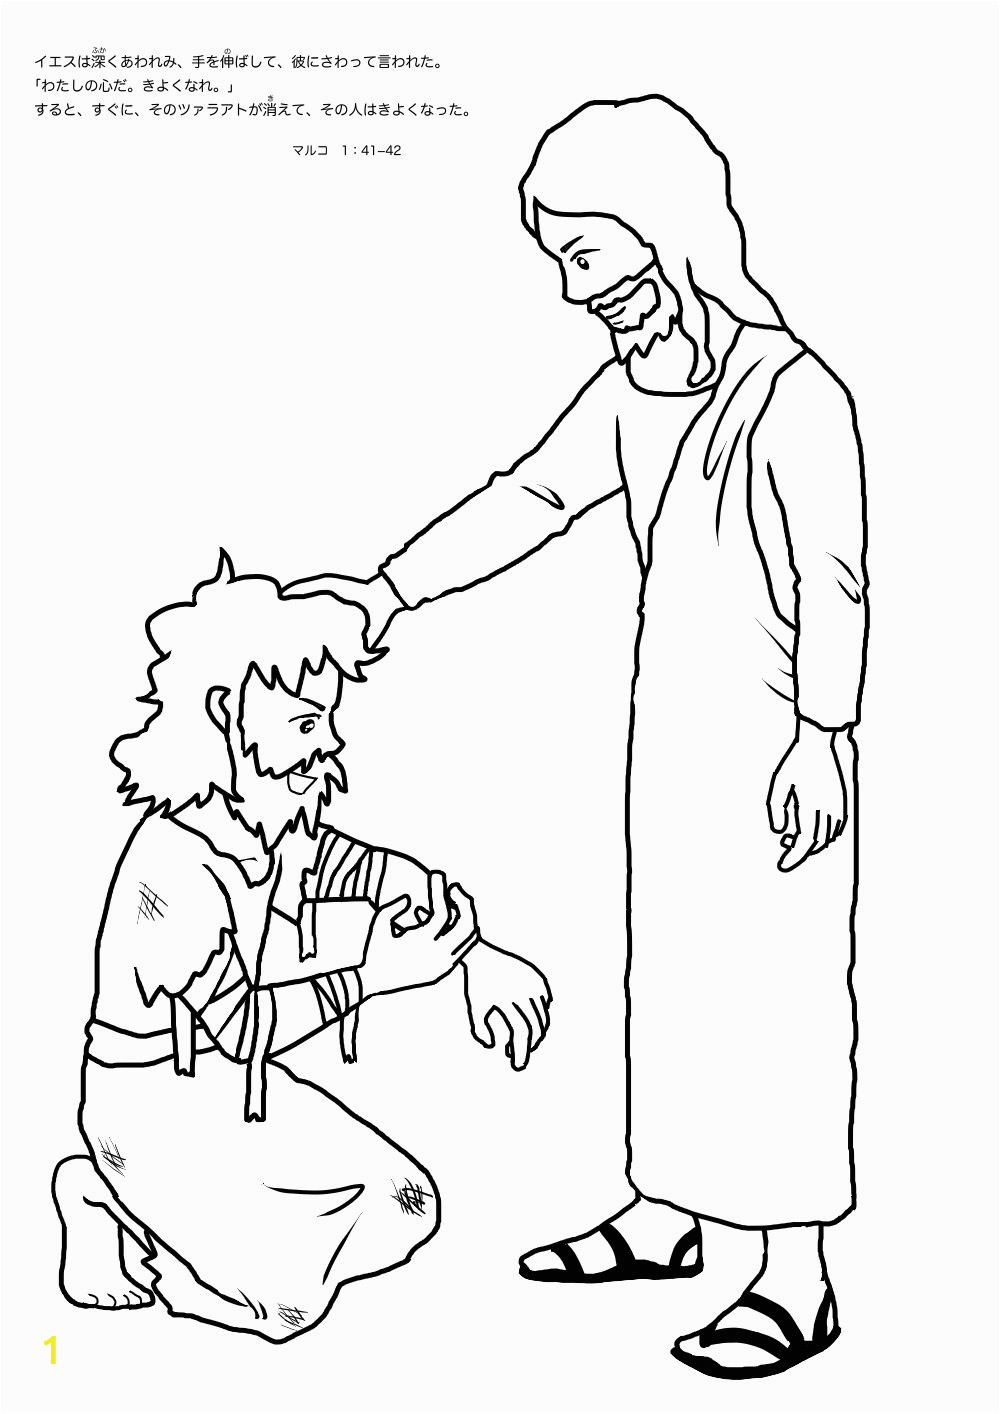 Jesus Heals 10 Lepers Coloring Page Jesus Heals Coloring Pages